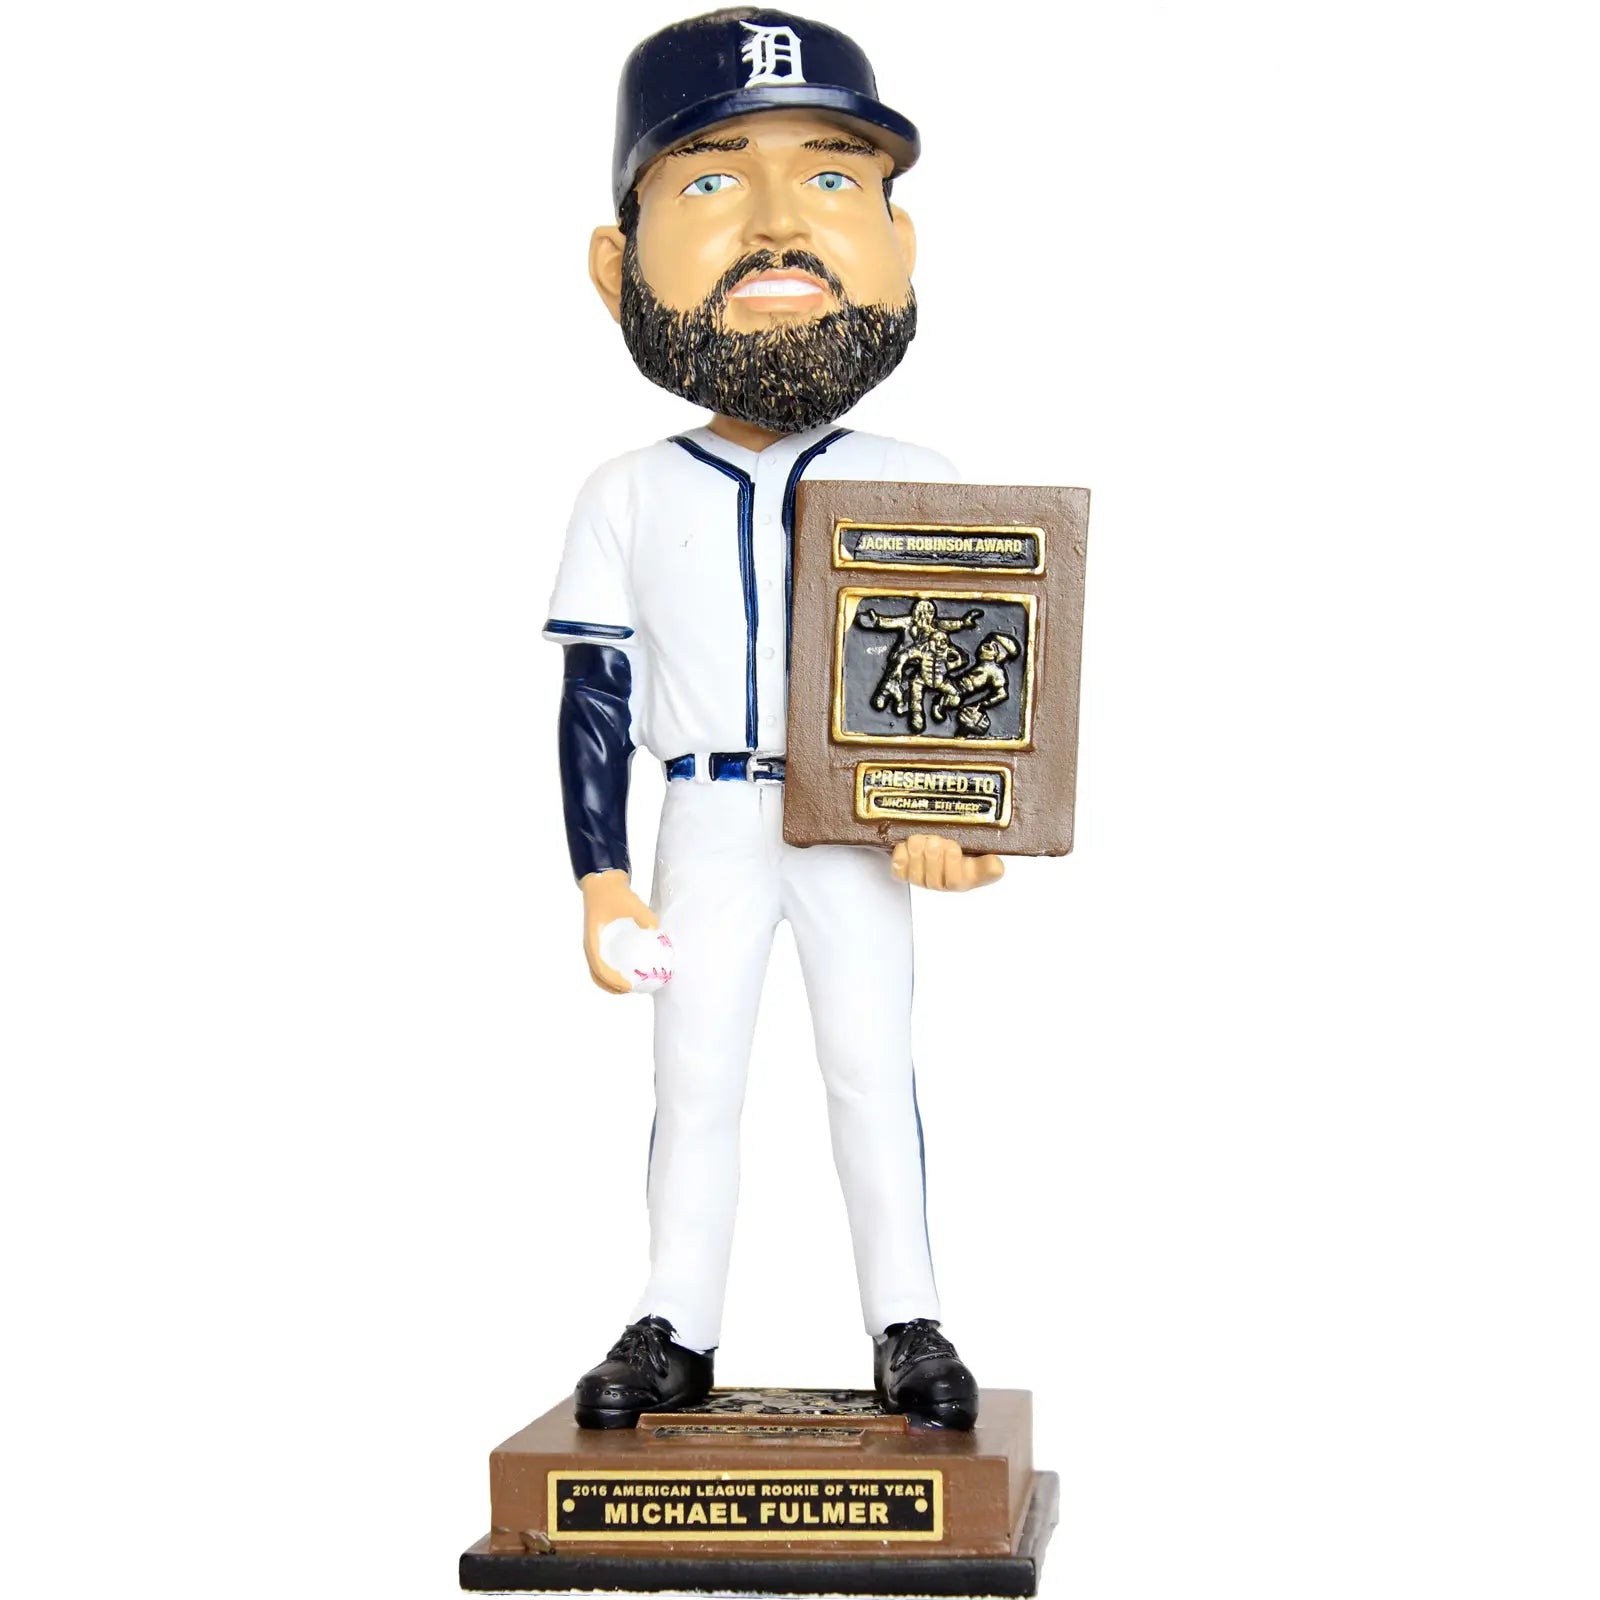 Detroit Tigers Michael Fulmer 2016 Rookie of the Year Award Bobblehead 